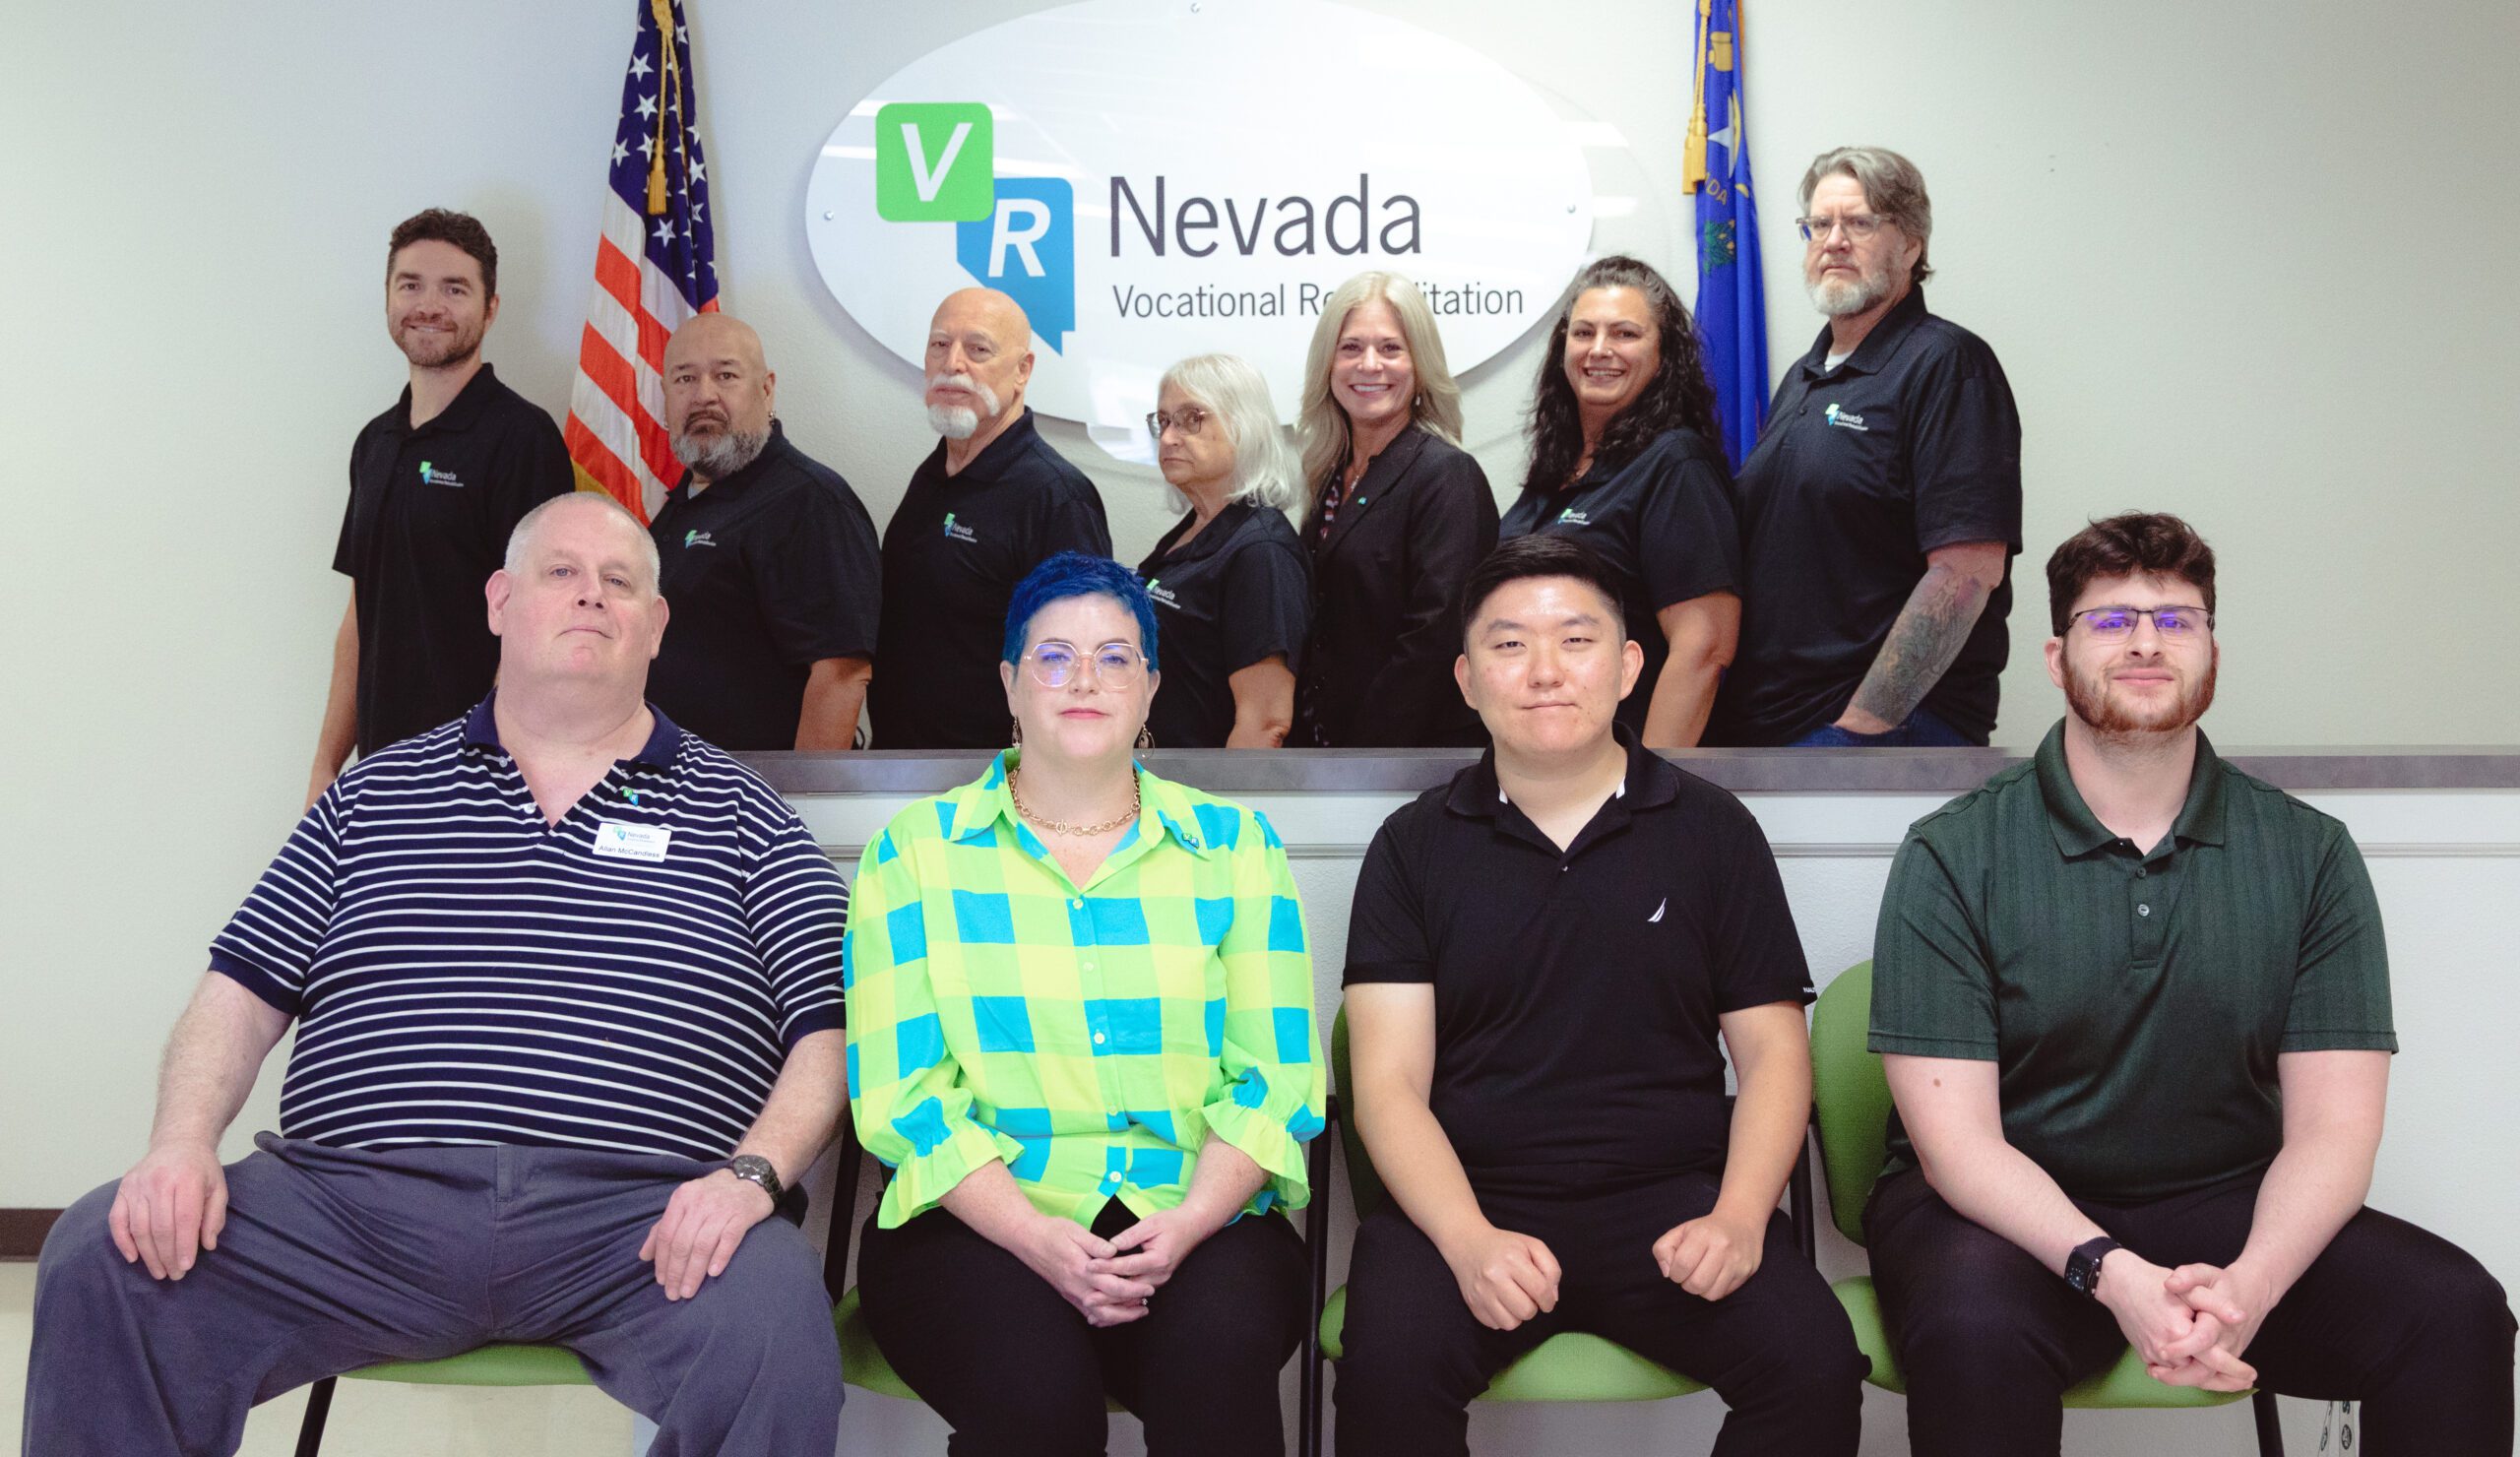 Diverse members of the VR Nevada Staff pose in the Northern Nevada lobby in front of the VR Nevada sign.